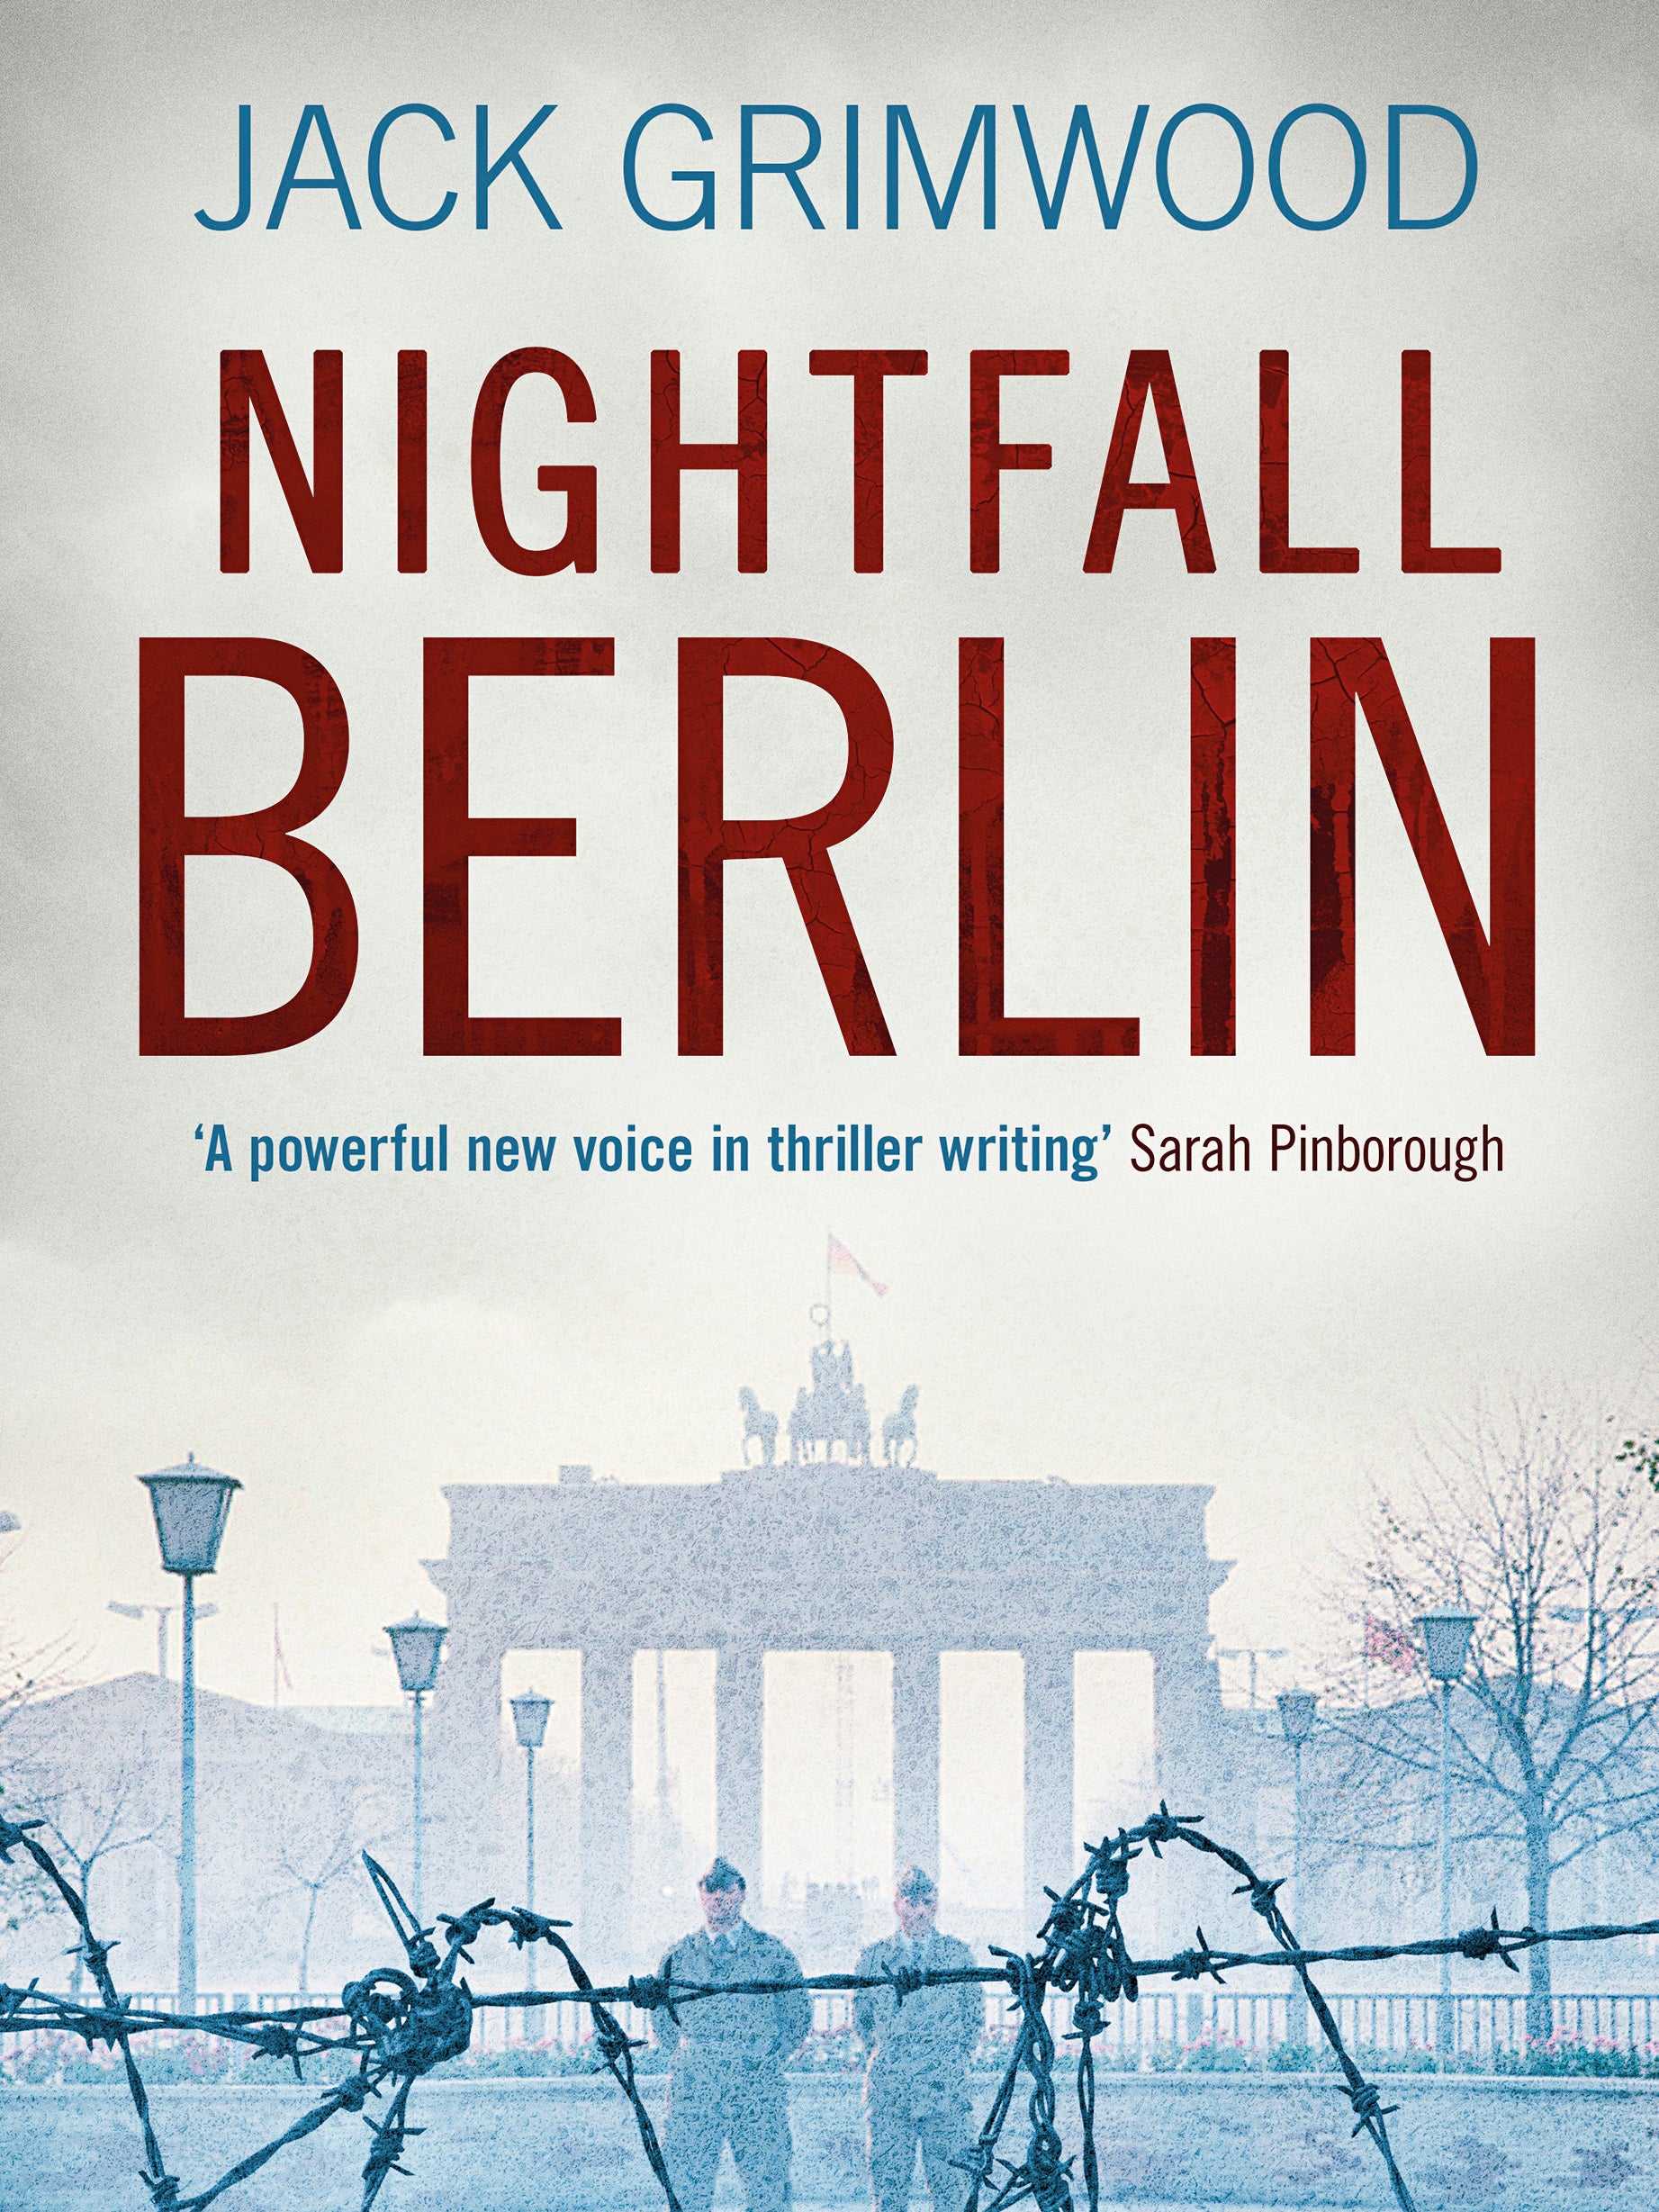 Grimwood spent a lot of time in Germany for his latest thriller